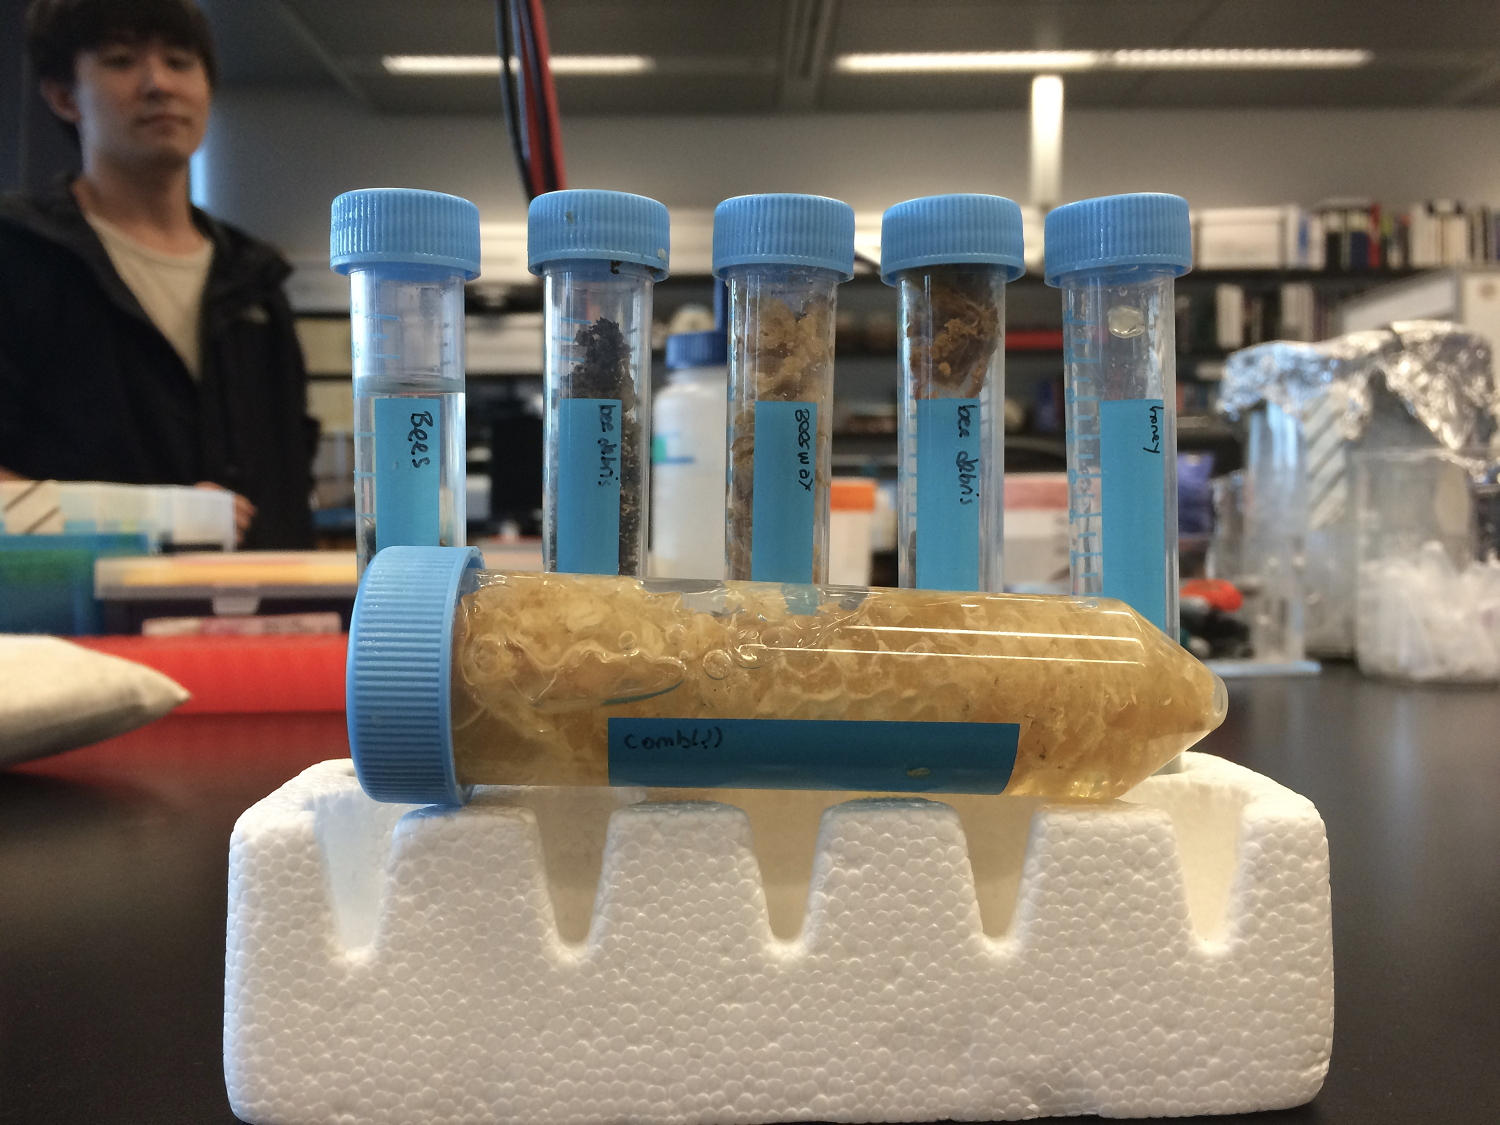 Honeybee hive debris in test tubes at a Cooper Union lab